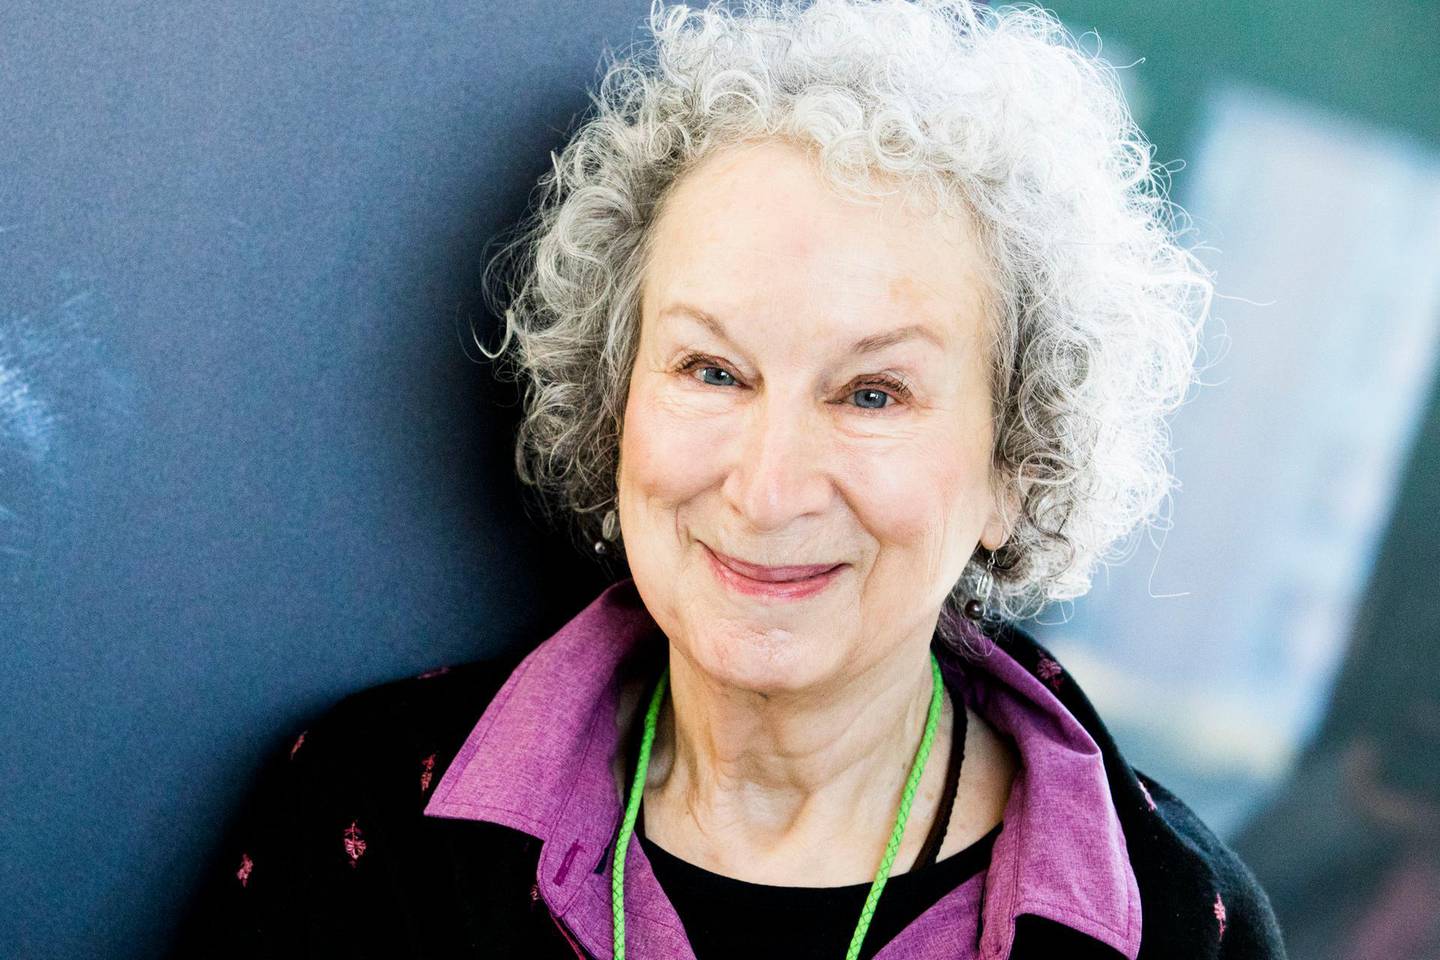 MILAN, ITALY - DECEMBER 06:  Canadian poet, novelist, literary critic, essayist, inventor, and environmental activist Margaret Atwood poses for portrait session at Noir In Festival on December 6, 2017 in Milan, Italy.  (Photo by Rosdiana Ciaravolo/Getty Images)